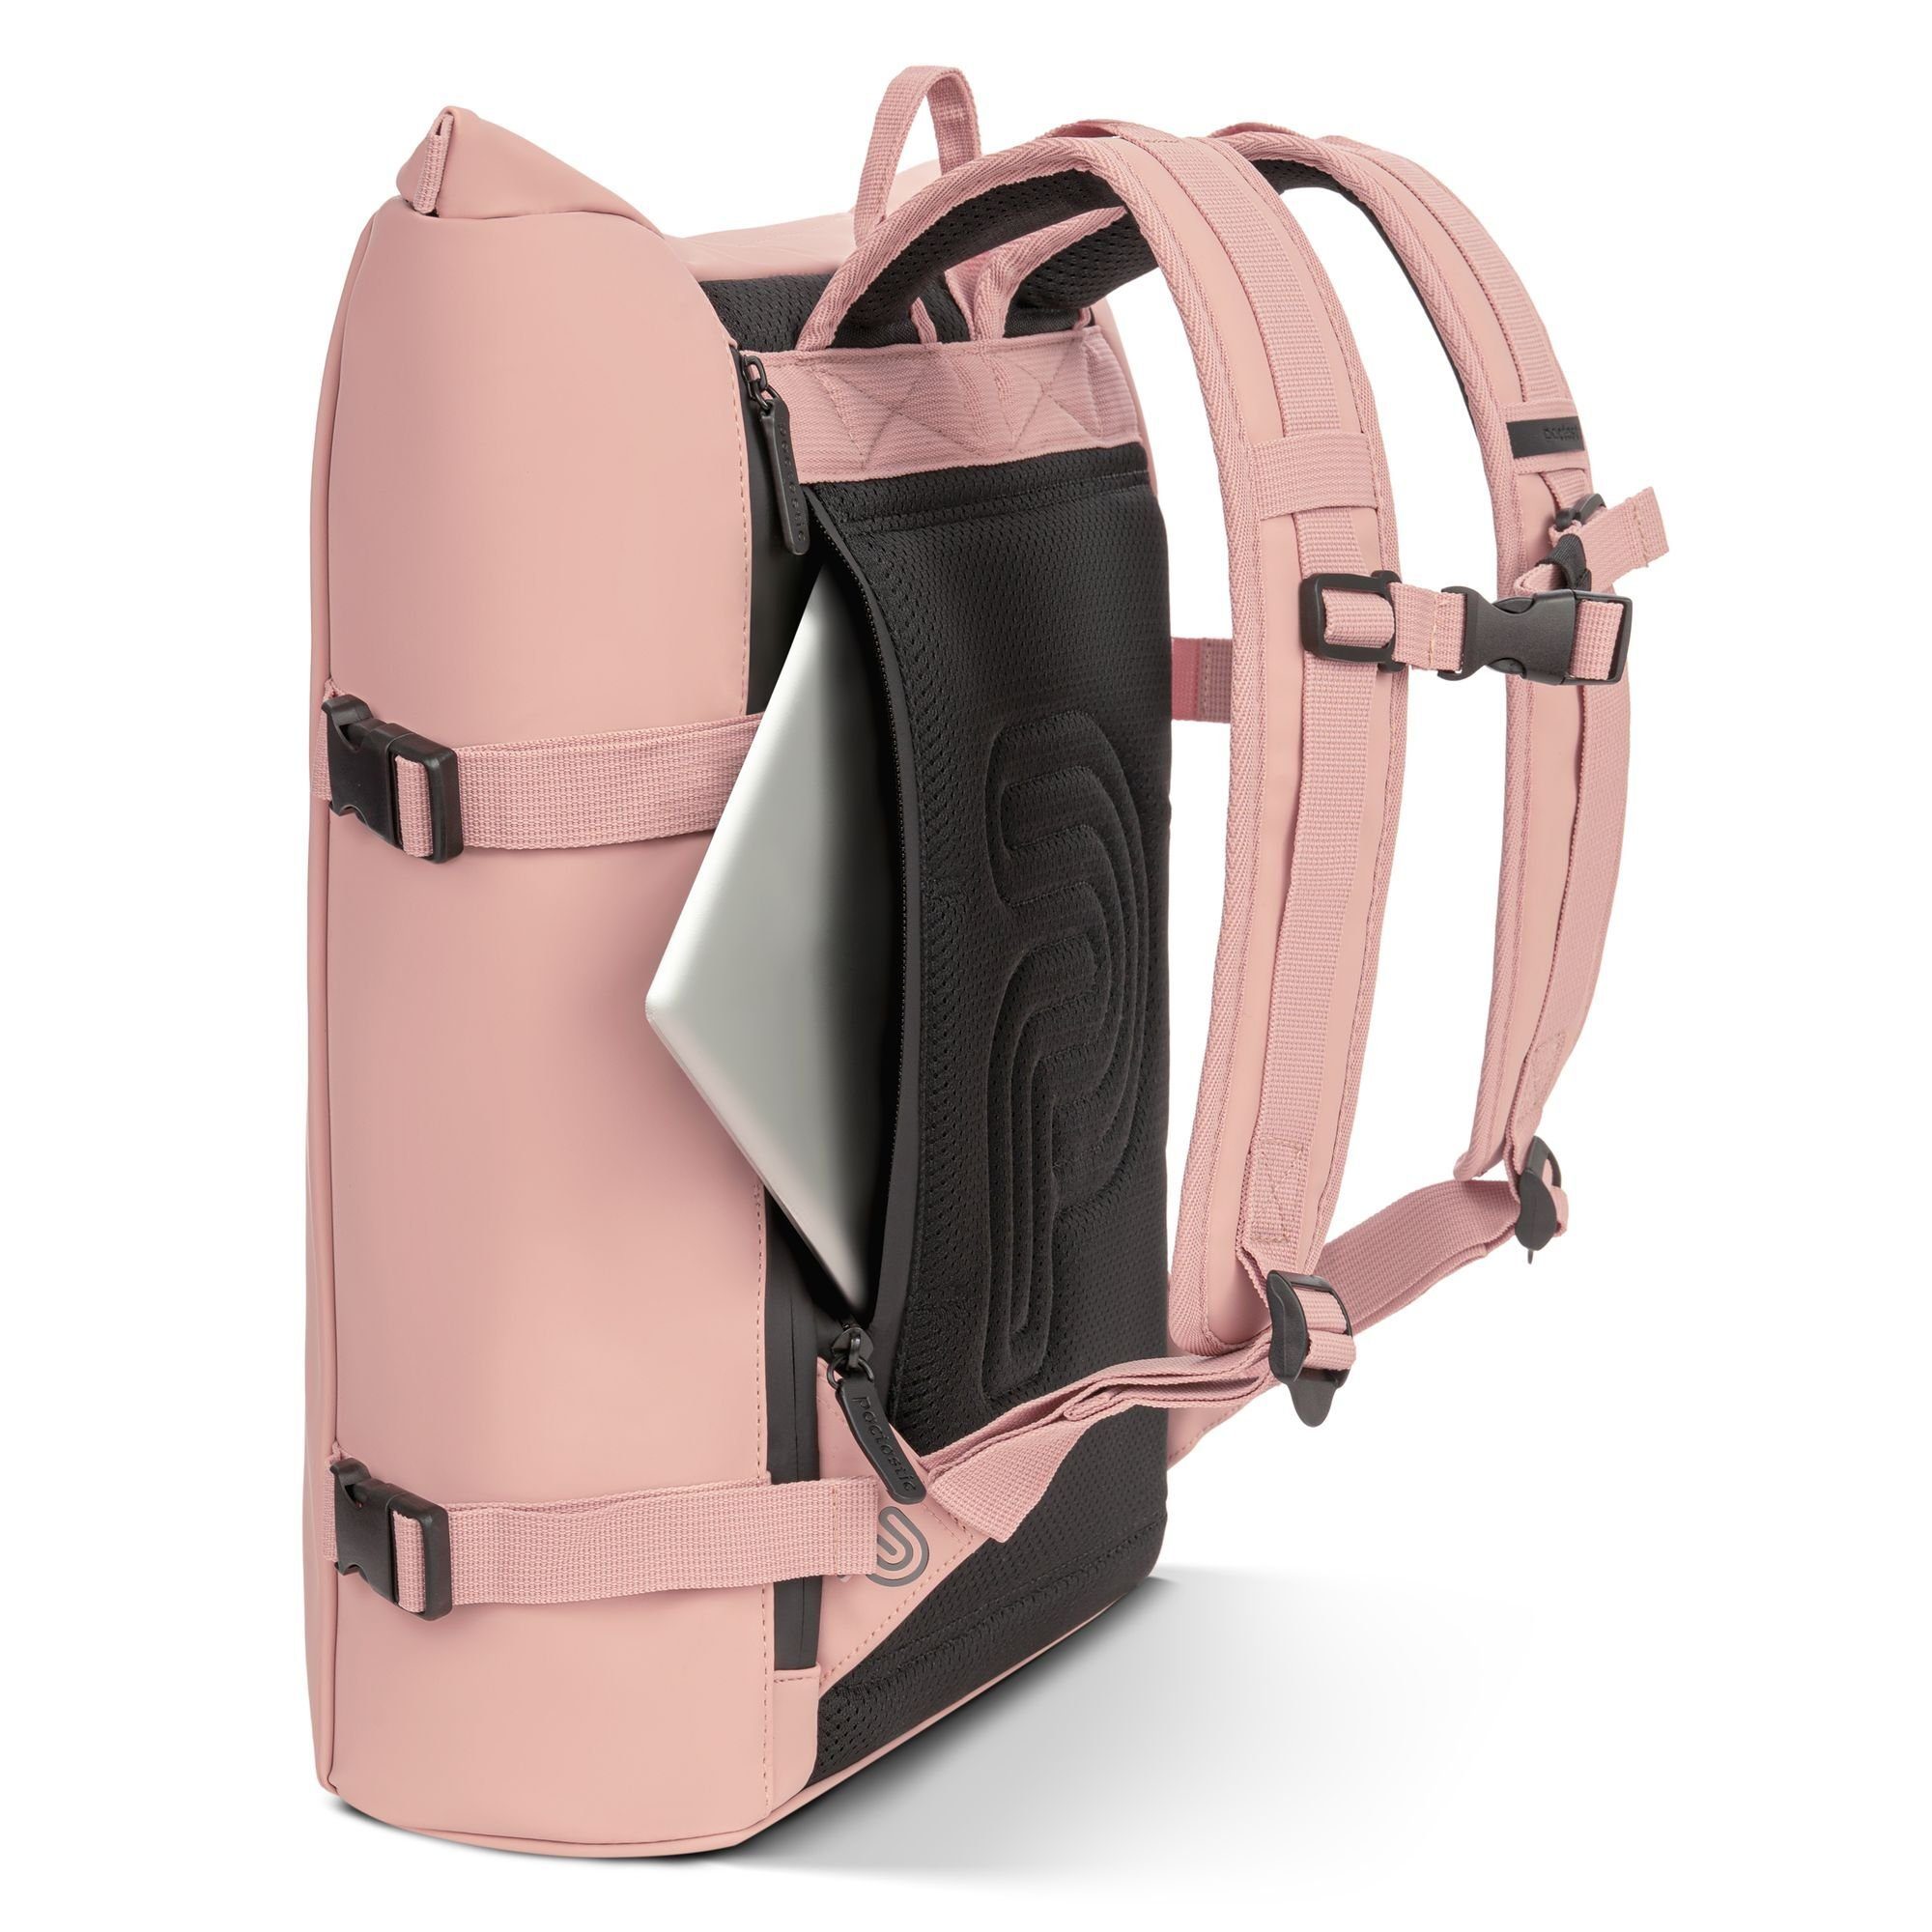 Tech-Material Pactastic Veganes Urban Daypack rose Collection,